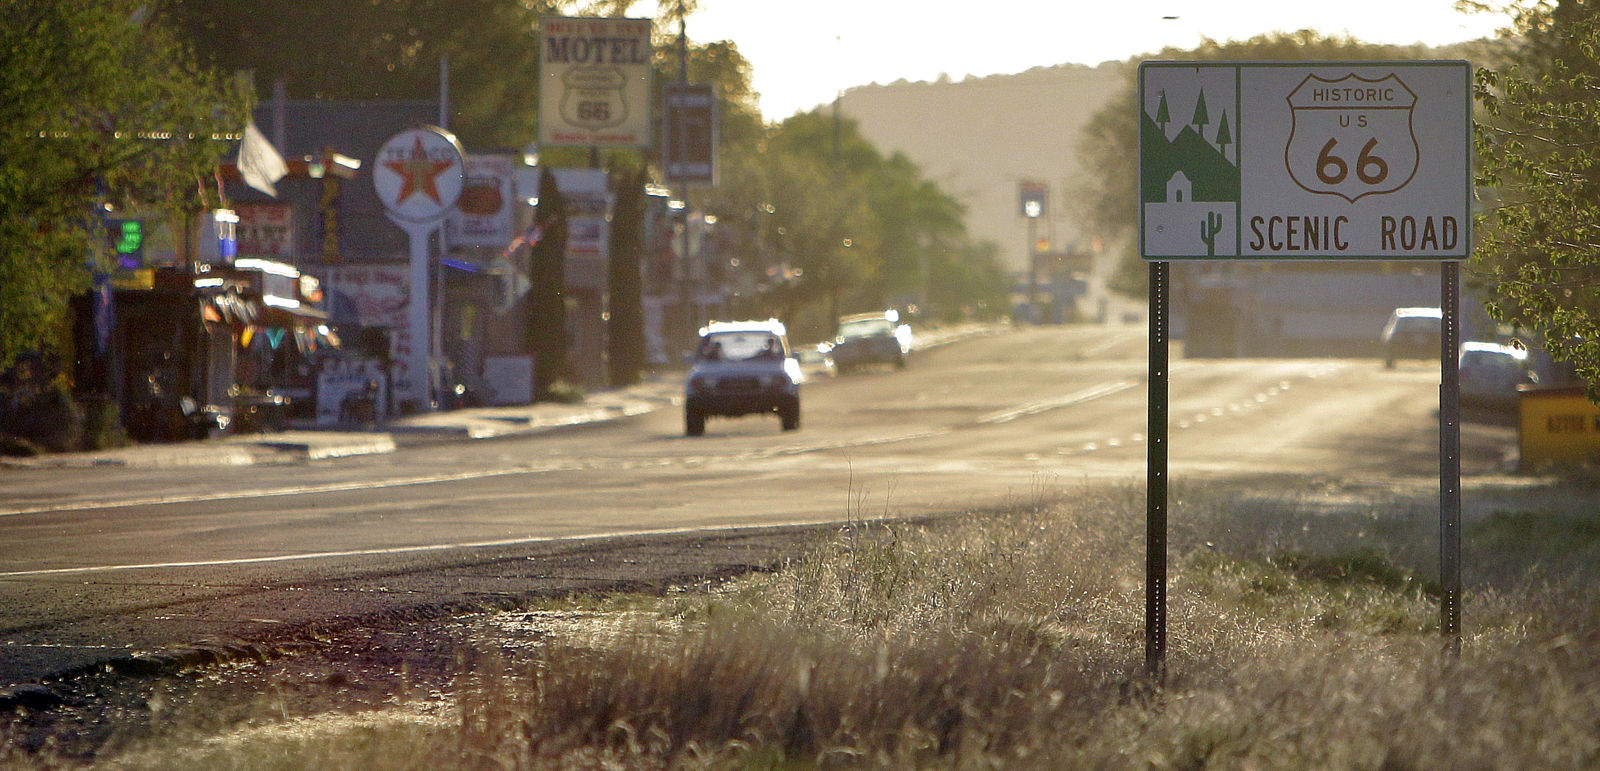 In this Thursday, May 5, 2011 picture, the sun sets in Seligman, Ariz. Angel Delgadillo, 84, was the driving force behind the formation of the Historic Route 66 Association of Arizona, which lobbied the state to dedicate U.S. 66 as "Historic Route 66." Highway signs were erected, the association launched an annual "Fun Run" of classic cars, tourists and media began converging and Seligman was reborn. (AP Photo/Matt York)